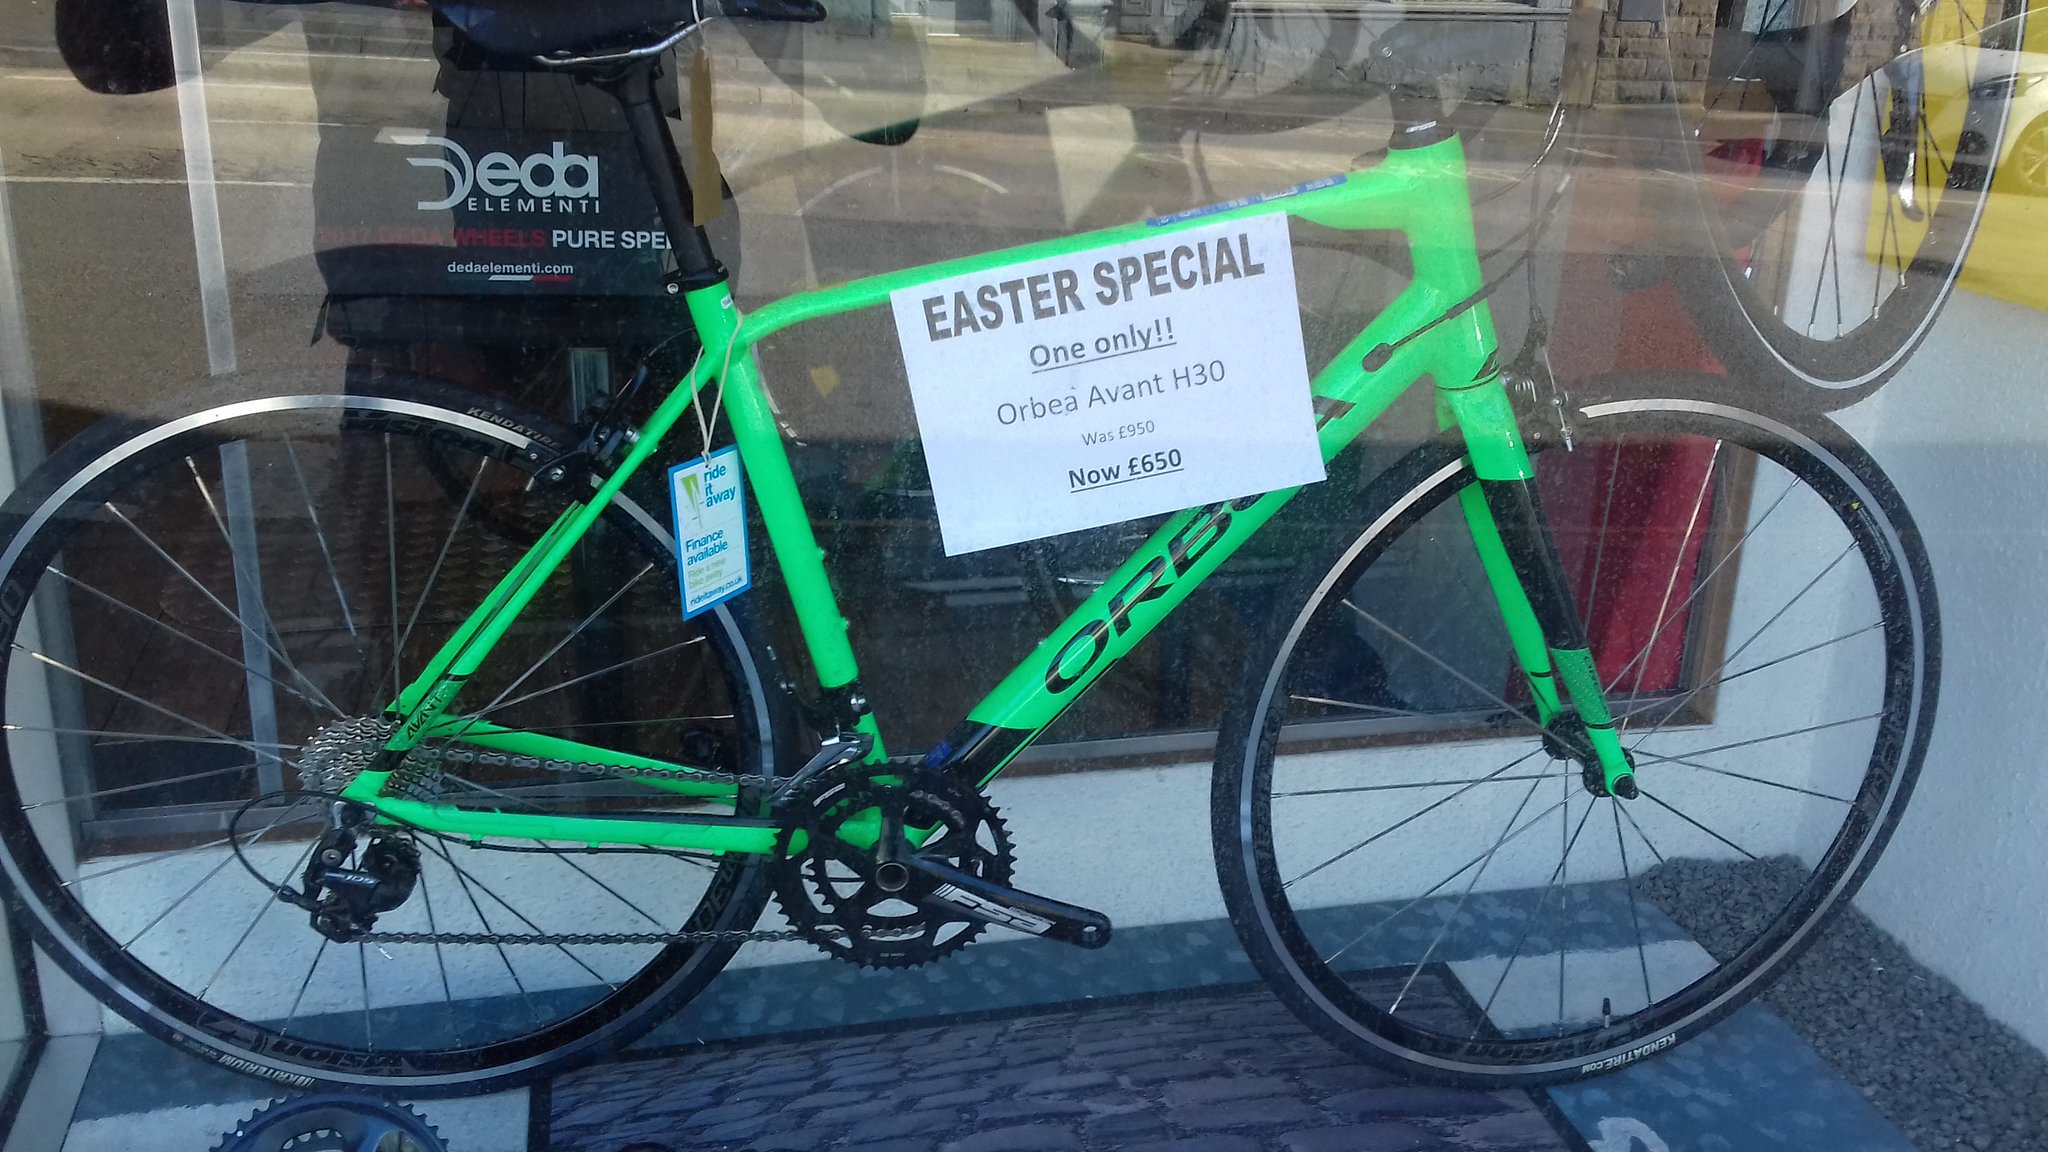 Sett Valley Cycles on X: "Special offer time again. Orbea Avant H30 55cm  with 11spd 105 & FSA/Vision components. Was £950 , now £650. #oneonly  #bargain #greenmachine #peakdistrict #roadcycling https://t.co/qcMstzPaX2"  / X